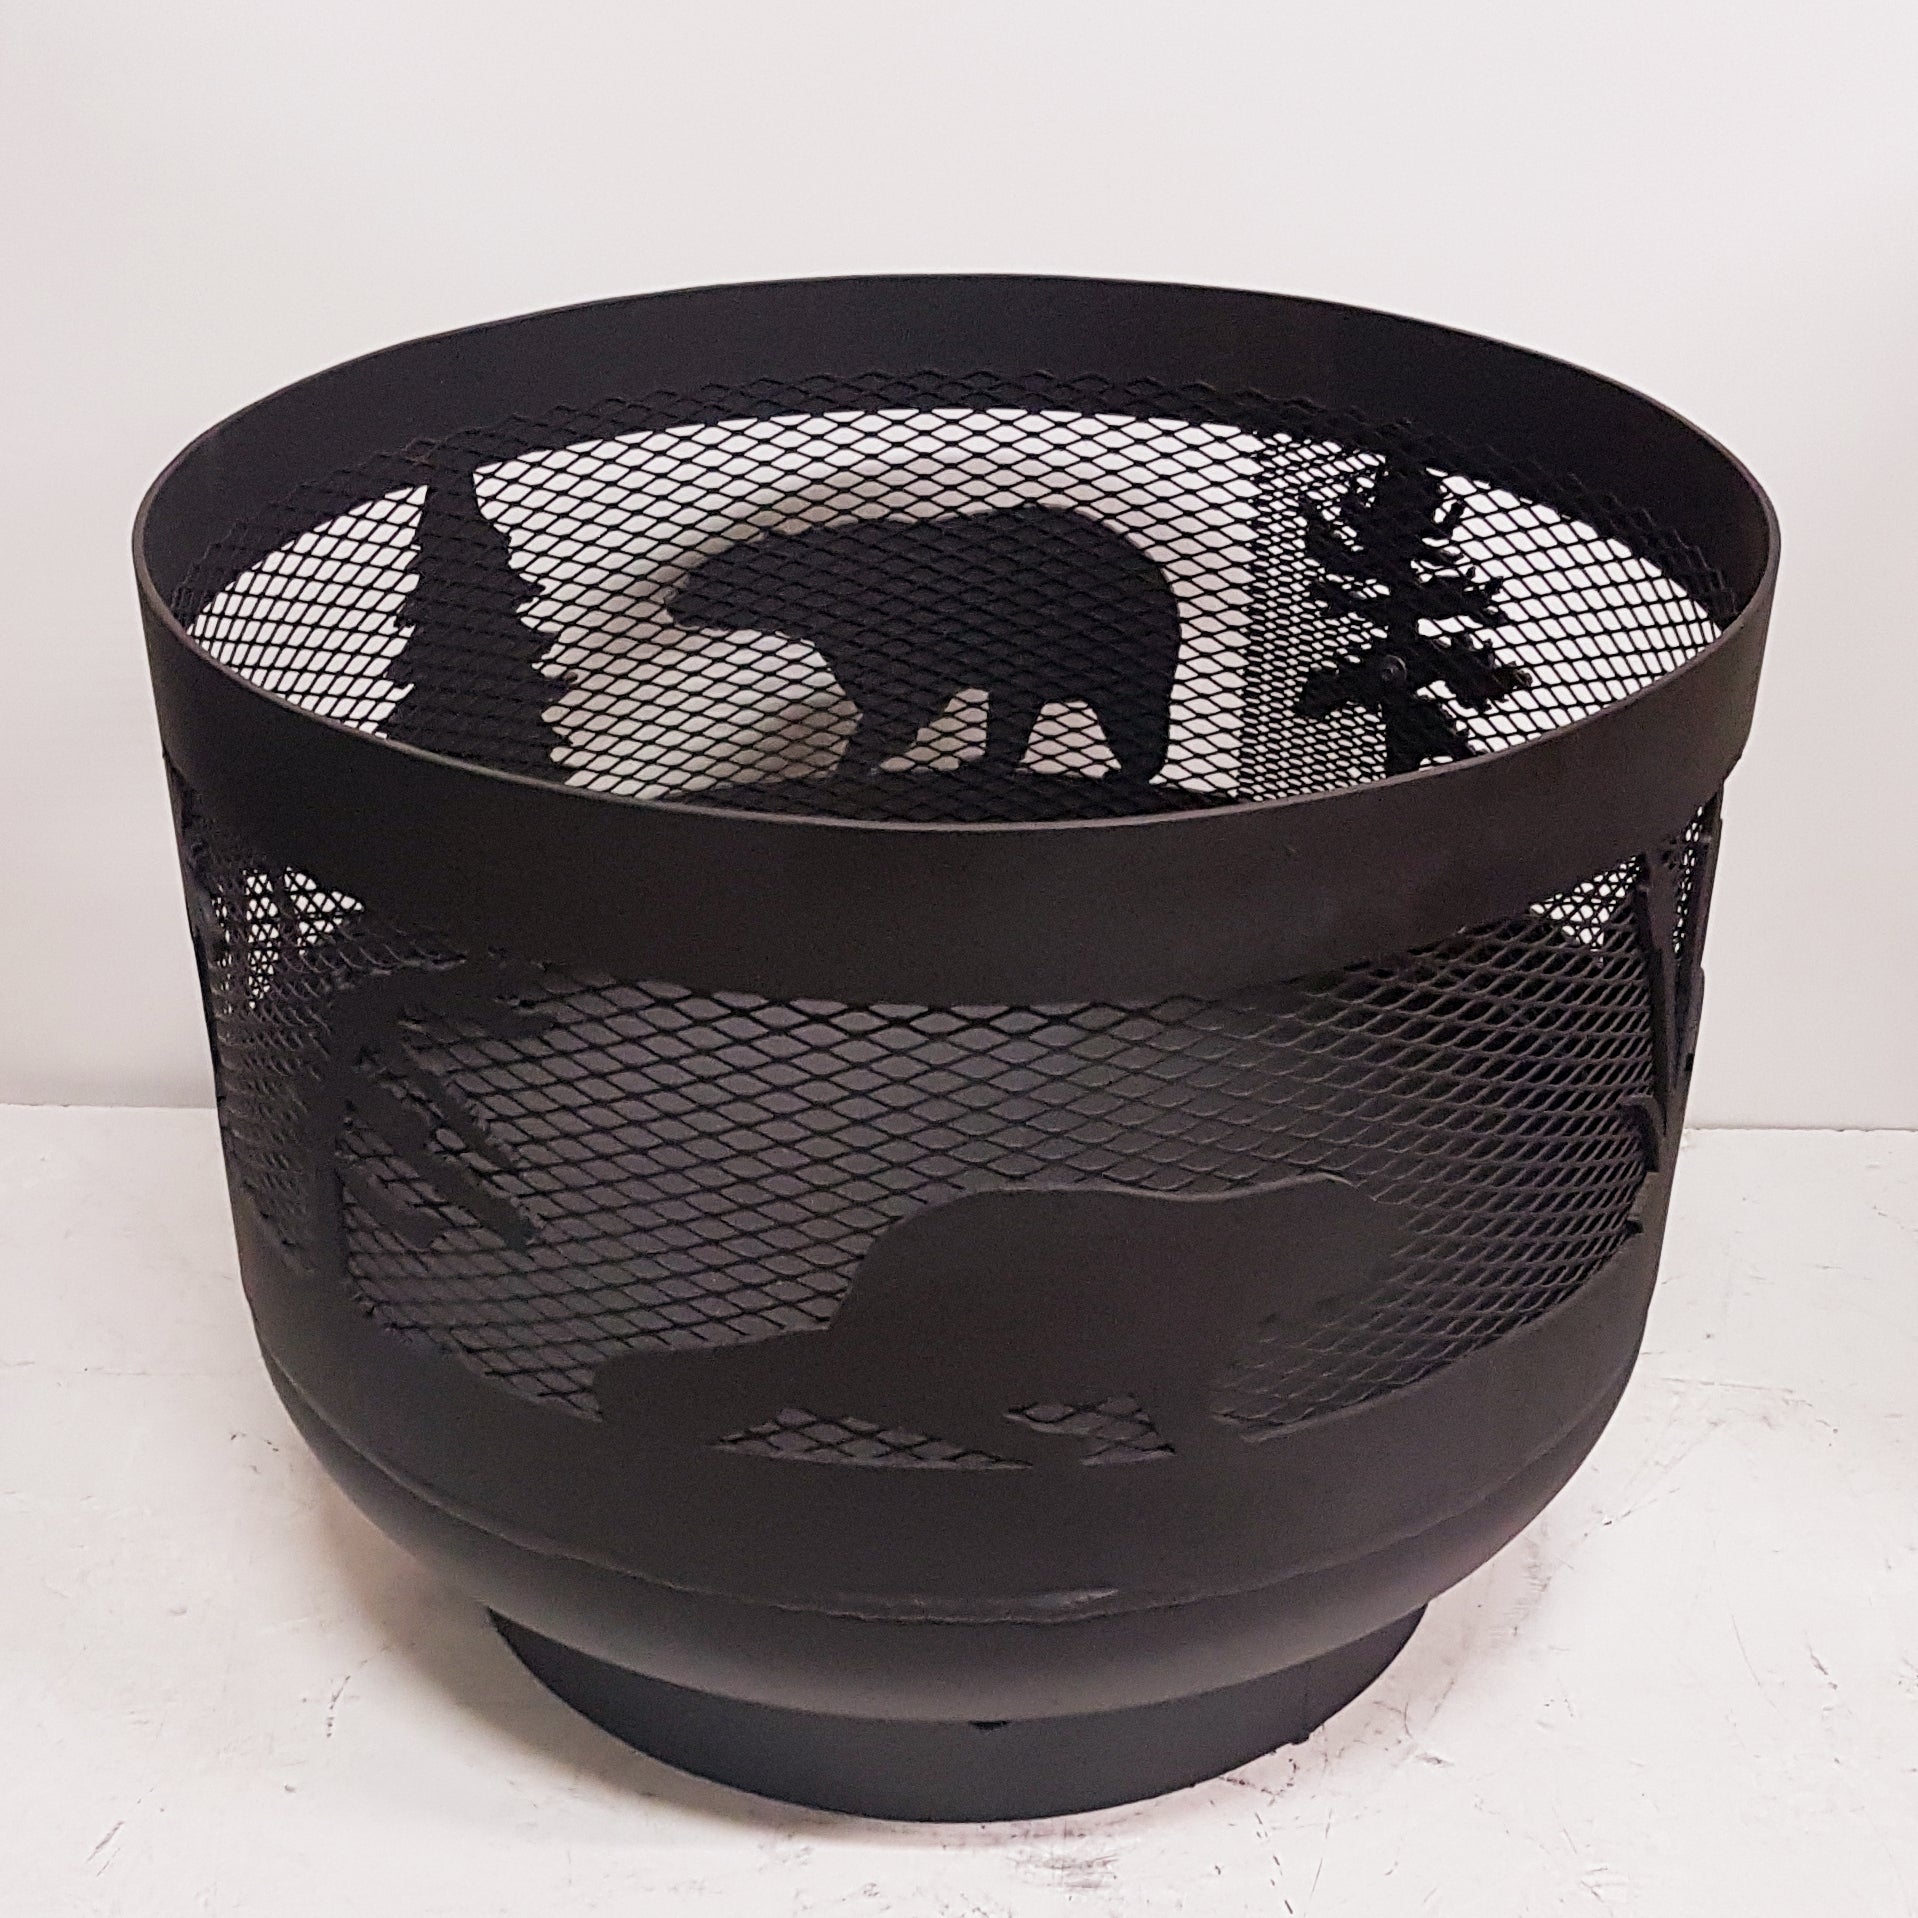 Standard Size Carved Fire Pit - Wild Life 2